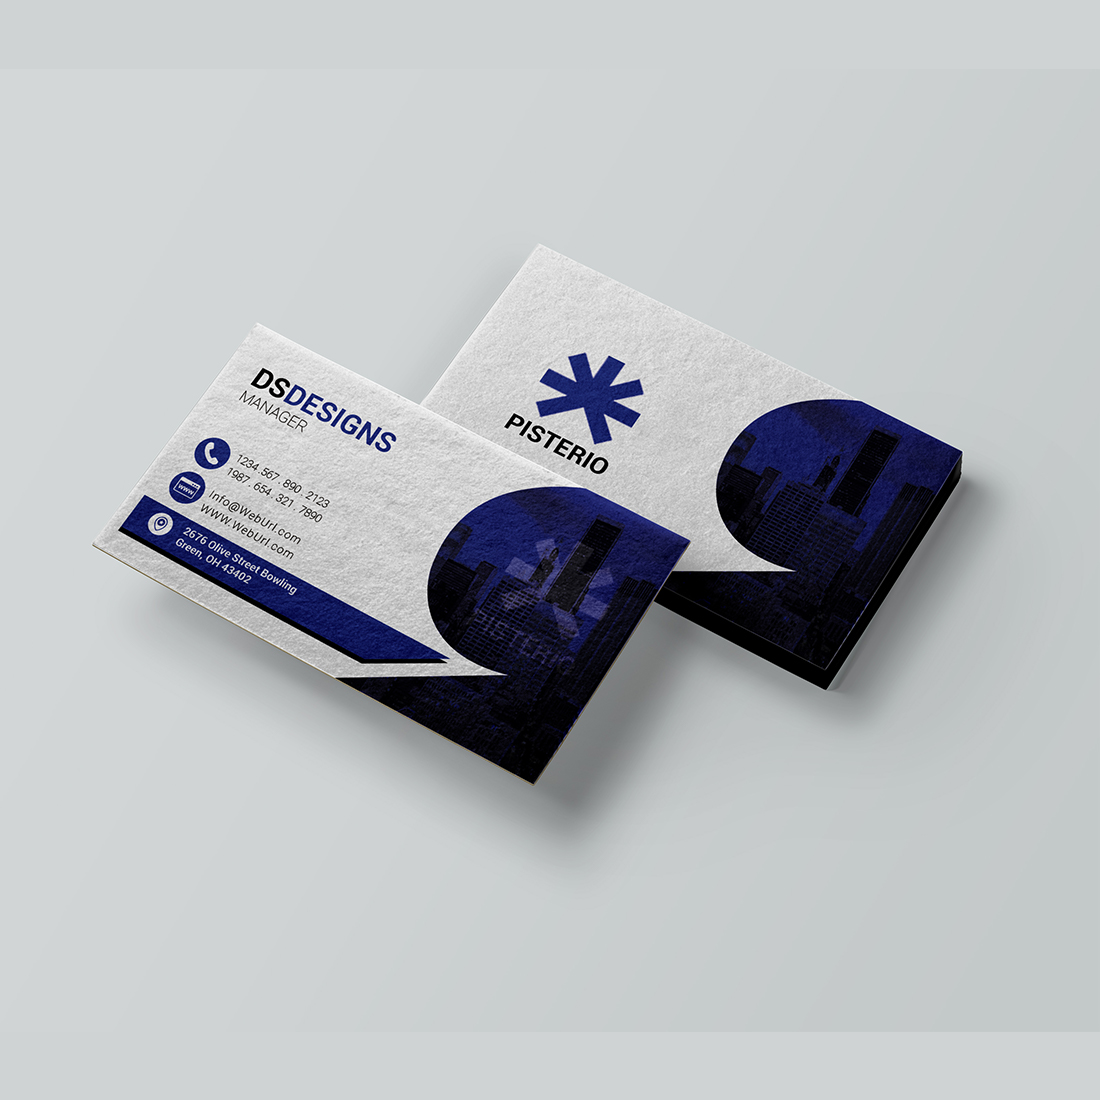 Two business cards with a blue and white design.